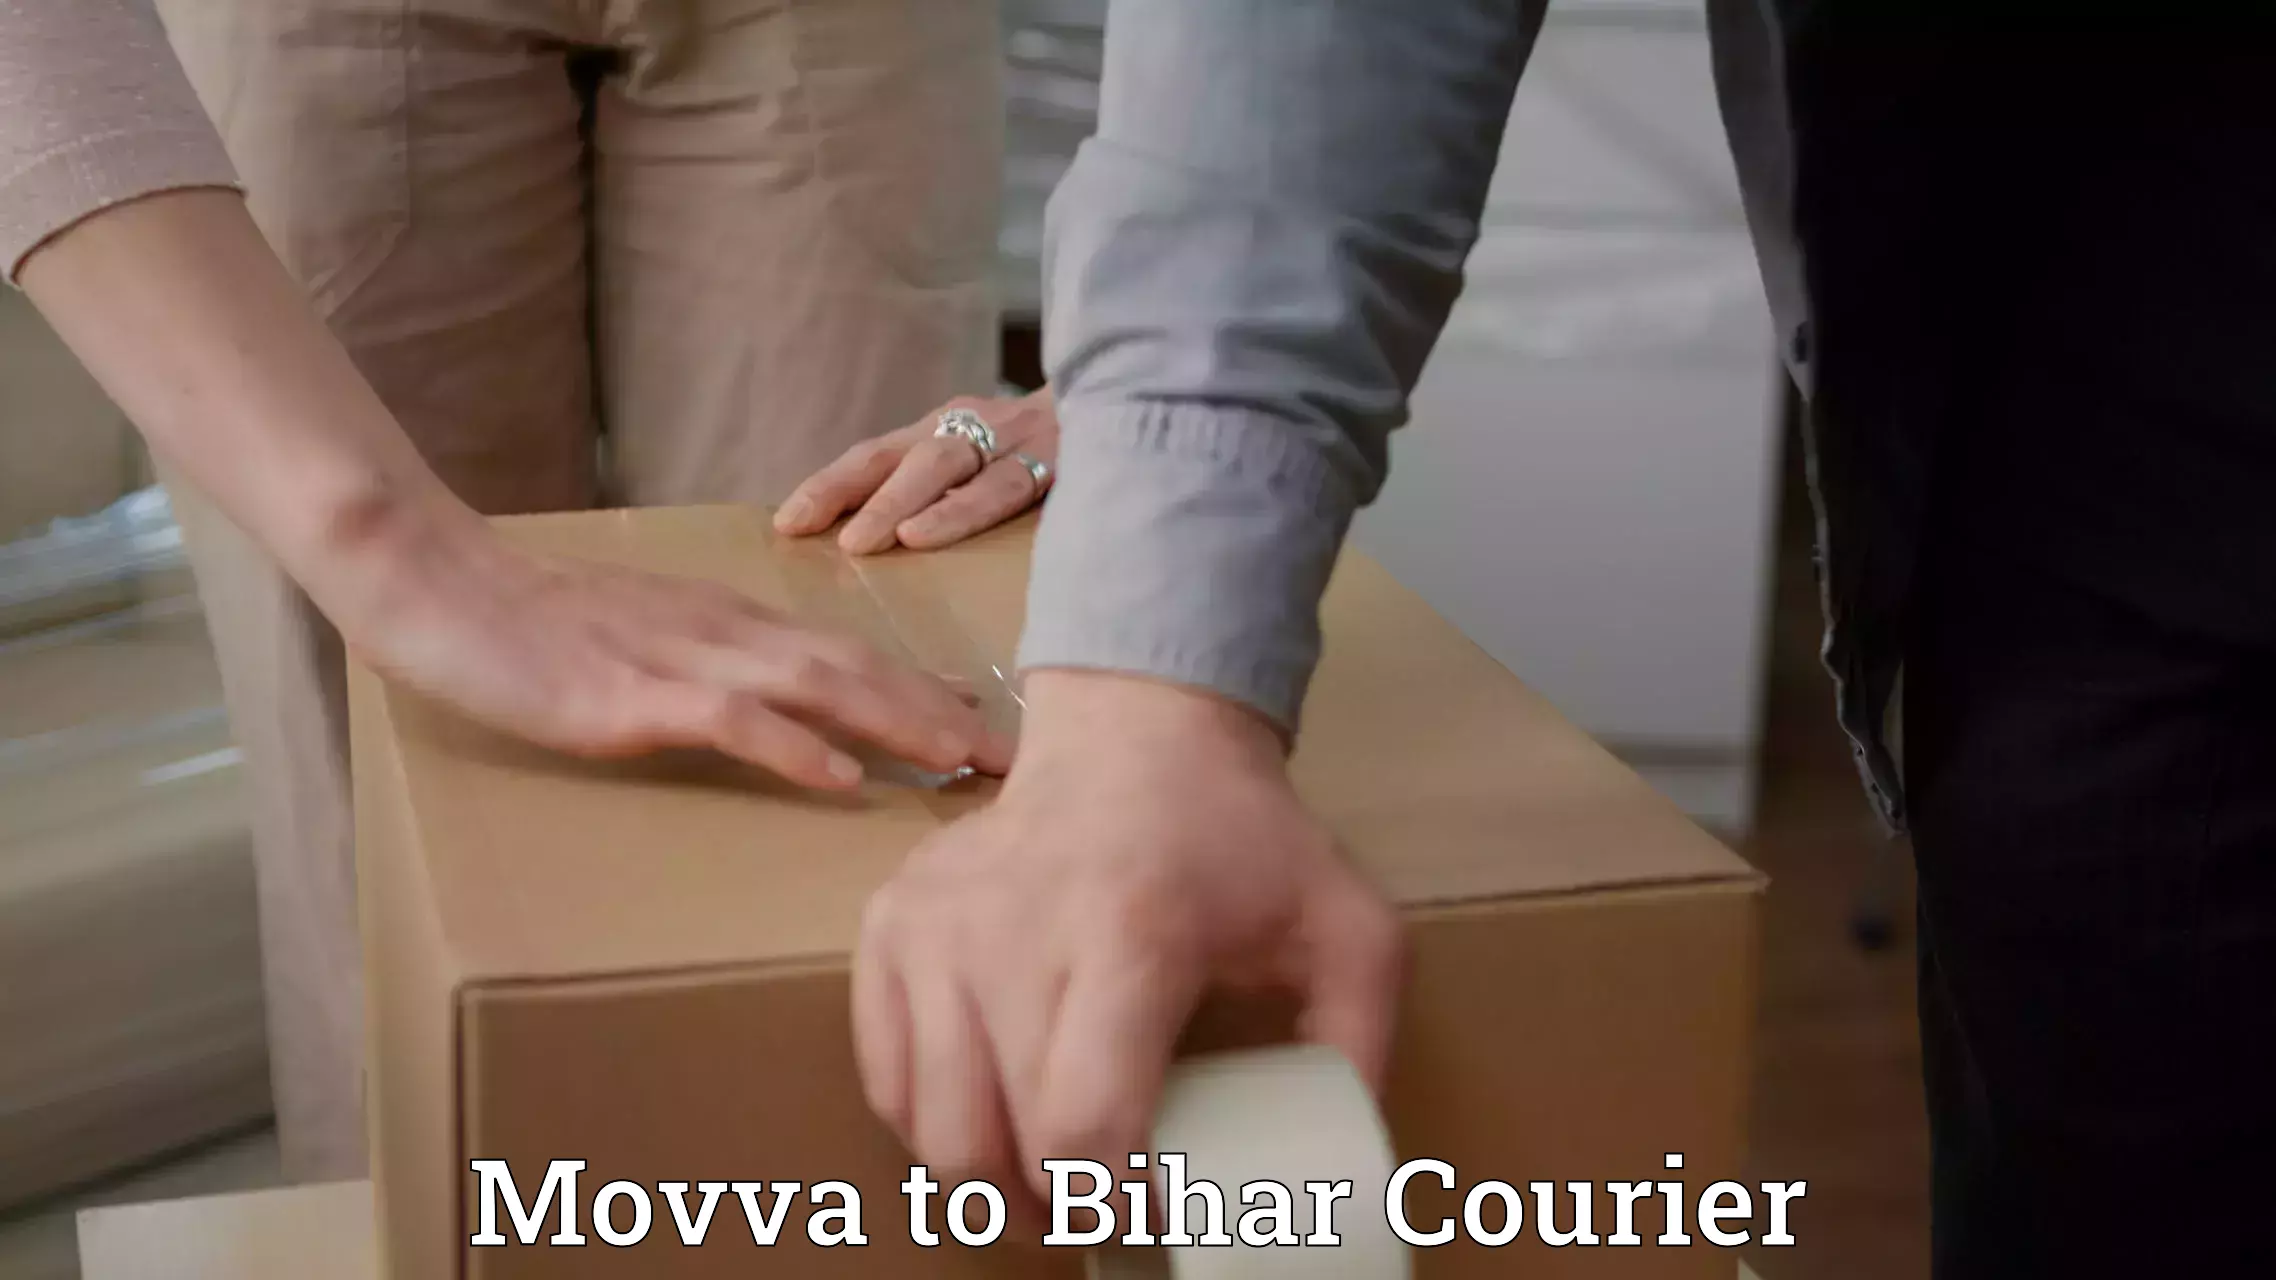 Enhanced tracking features Movva to Bihar